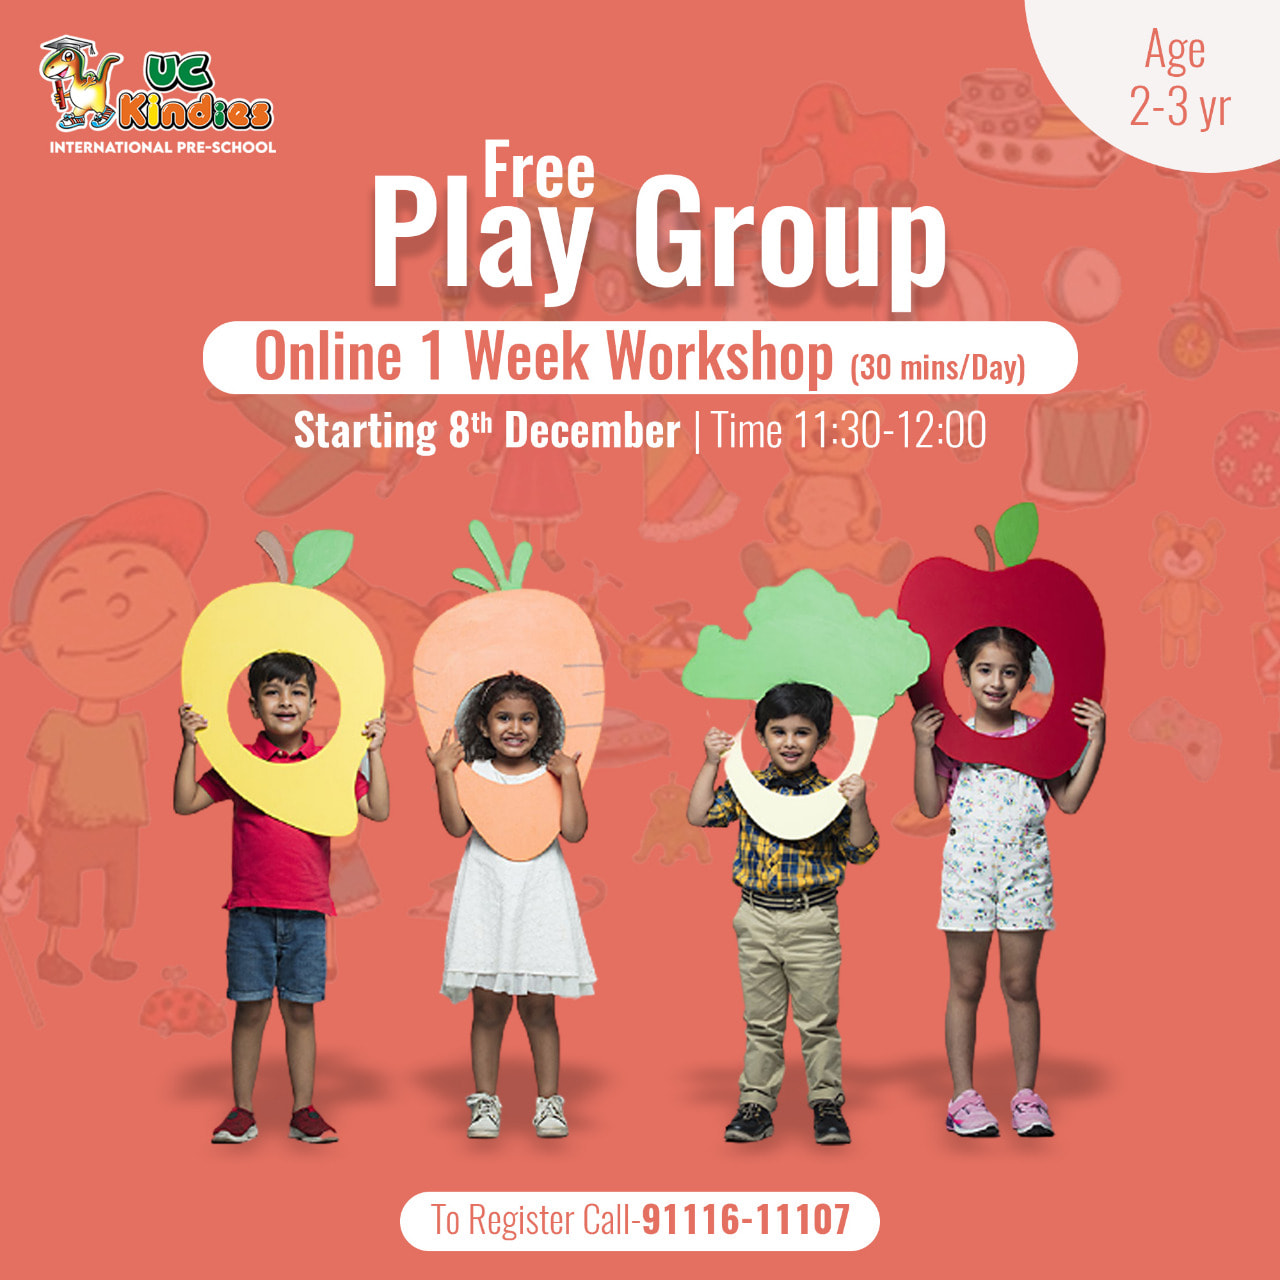 Playgroup admission